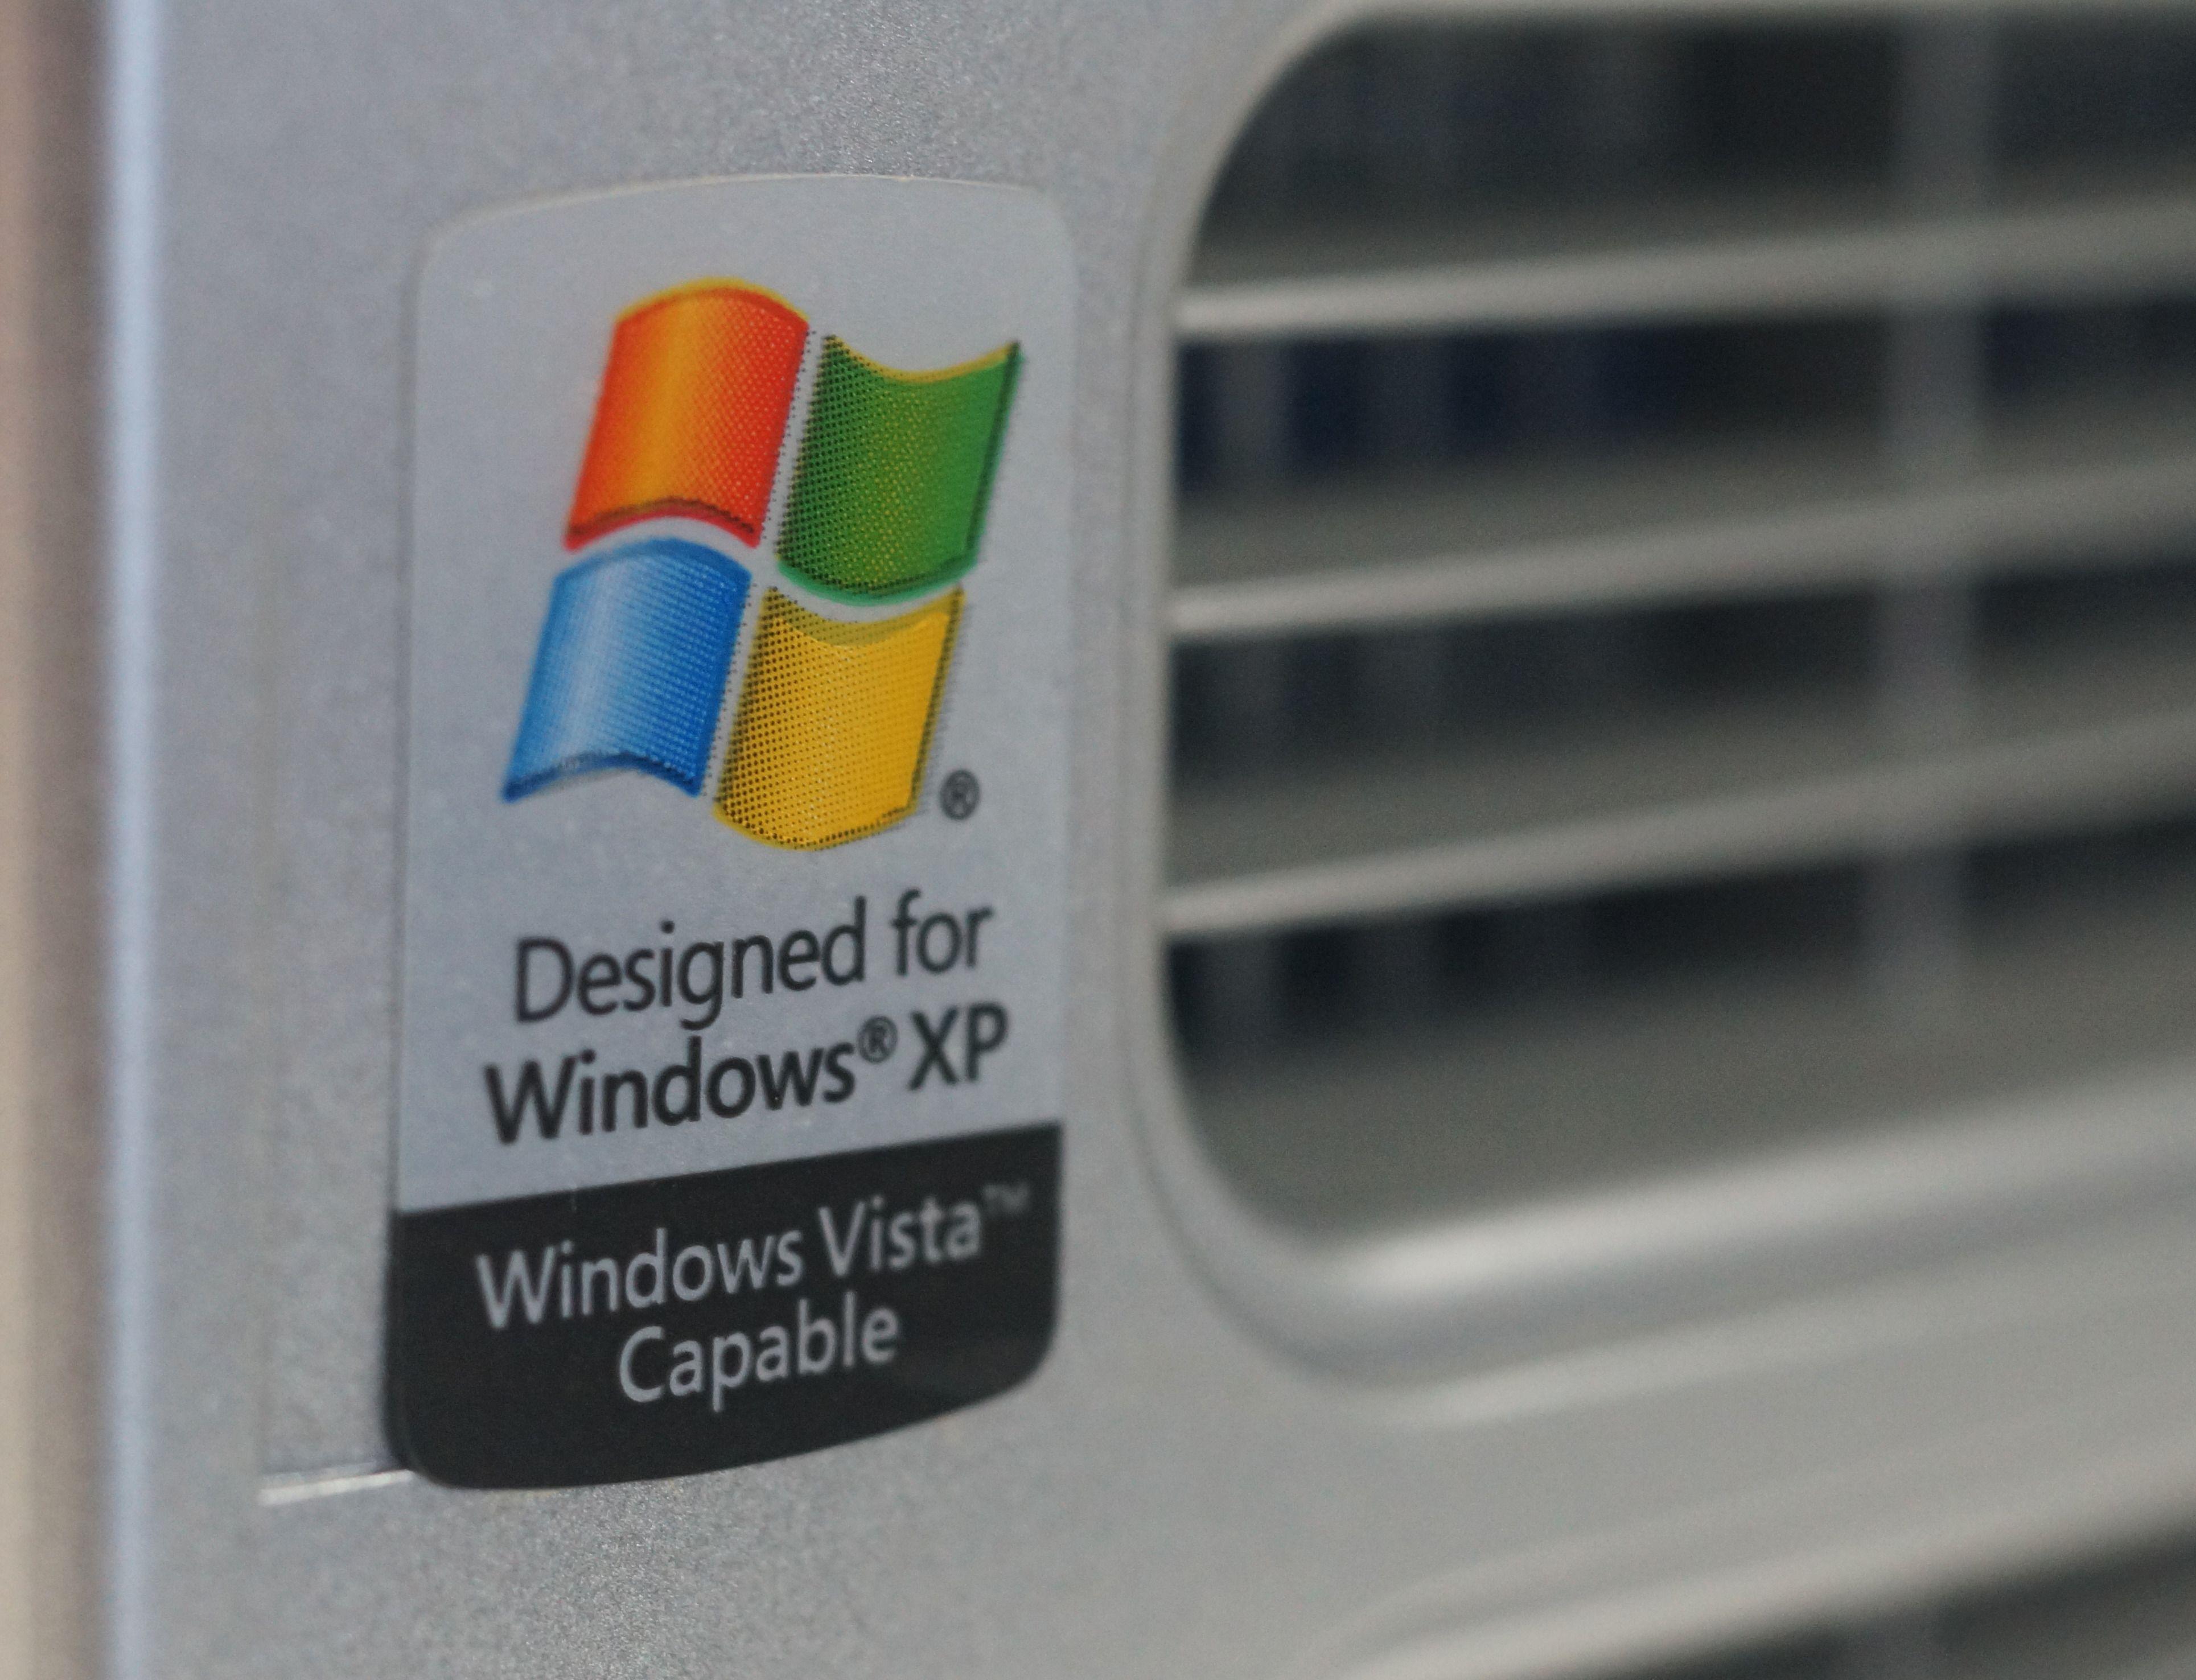 Old Windows Computer Logo - Can your old PC run Windows 10? The answer will surprise you